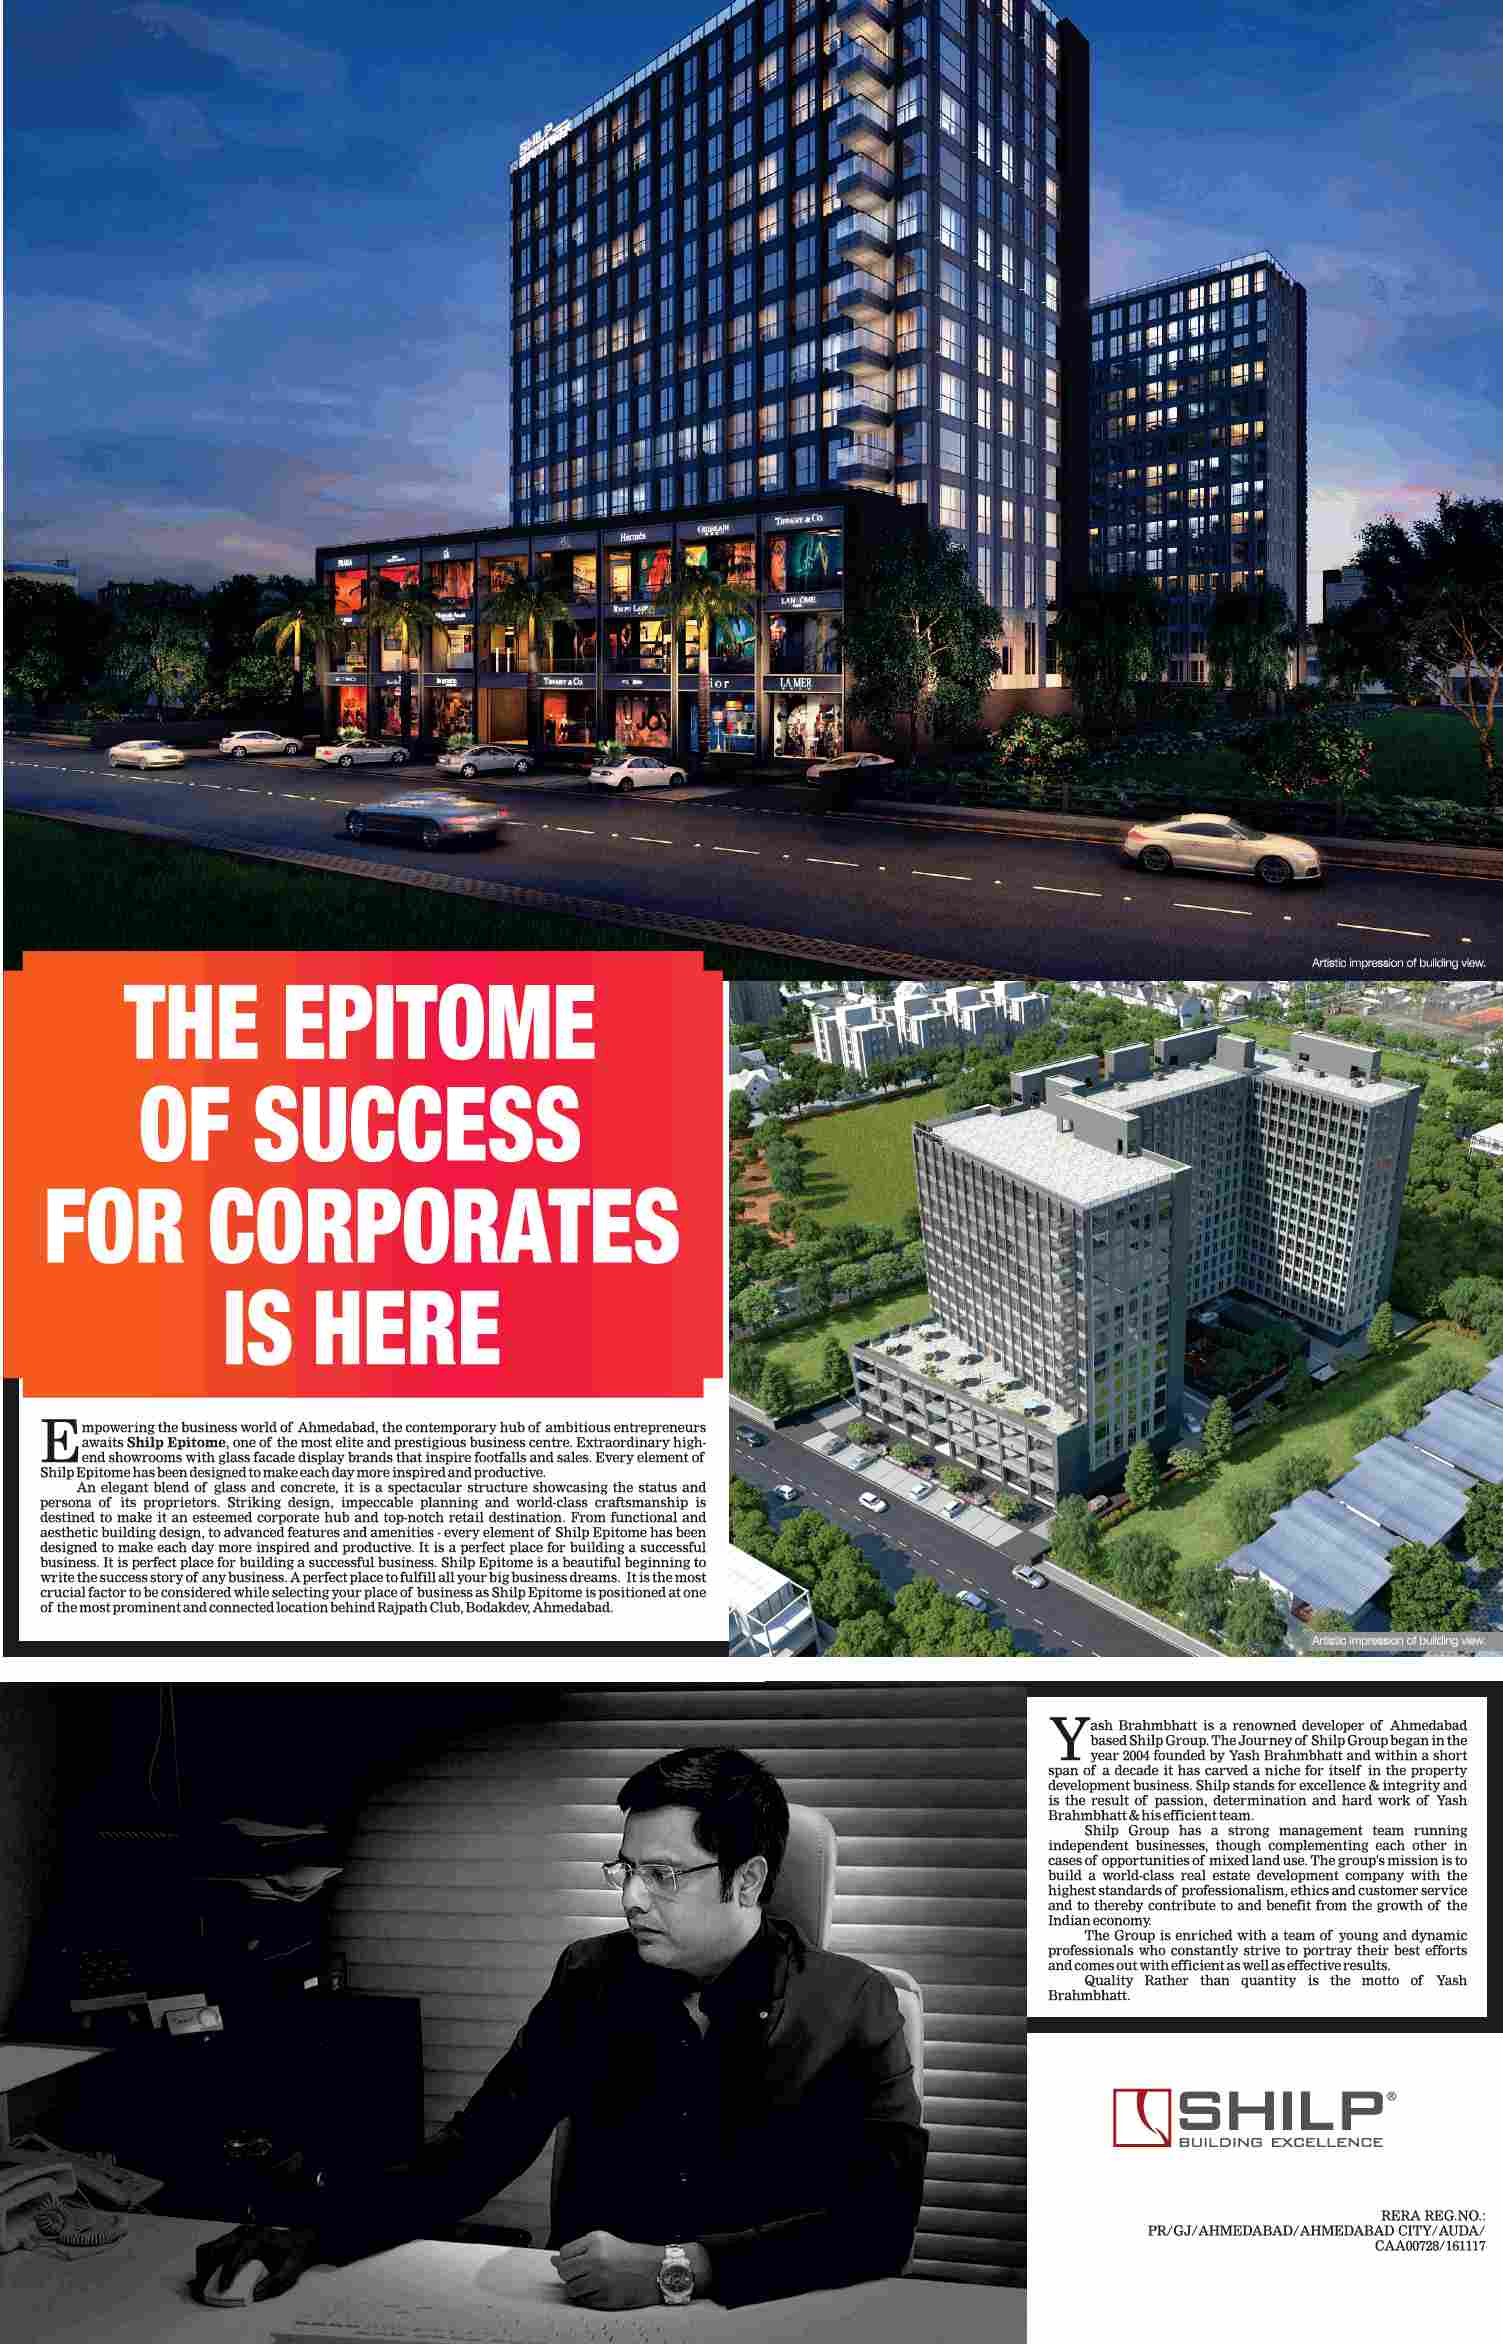 The epitome of success for corporates is here at Shilp Epitome in Ahmedabad Update